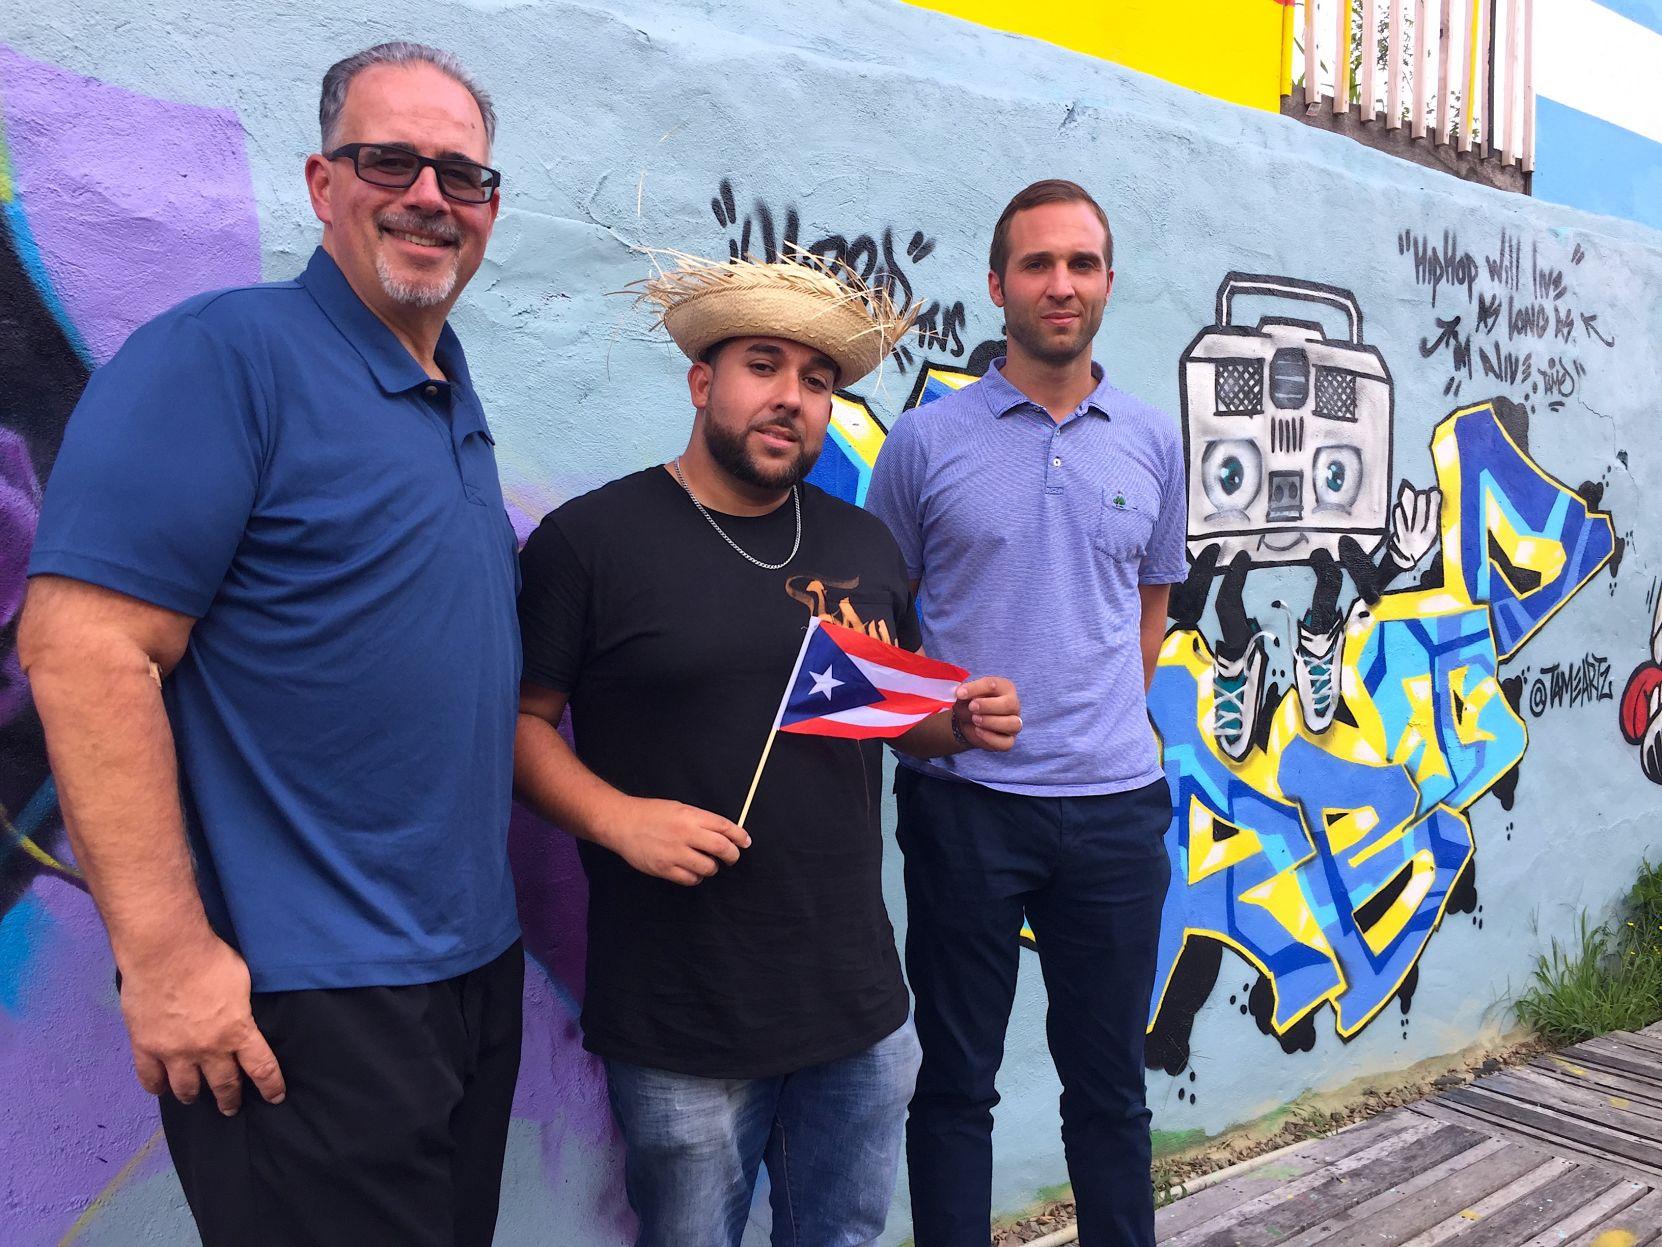 Graffiti artist Christian "TameArts" Rodriguez and the crew at Sunflower Philly cordially invite you to dive into all things Latino culture – for a great cause, courtesy of this event, which proceeds benefit those still struggling from the effects of Hurricane Maria. | Image: Kerith Gabriel